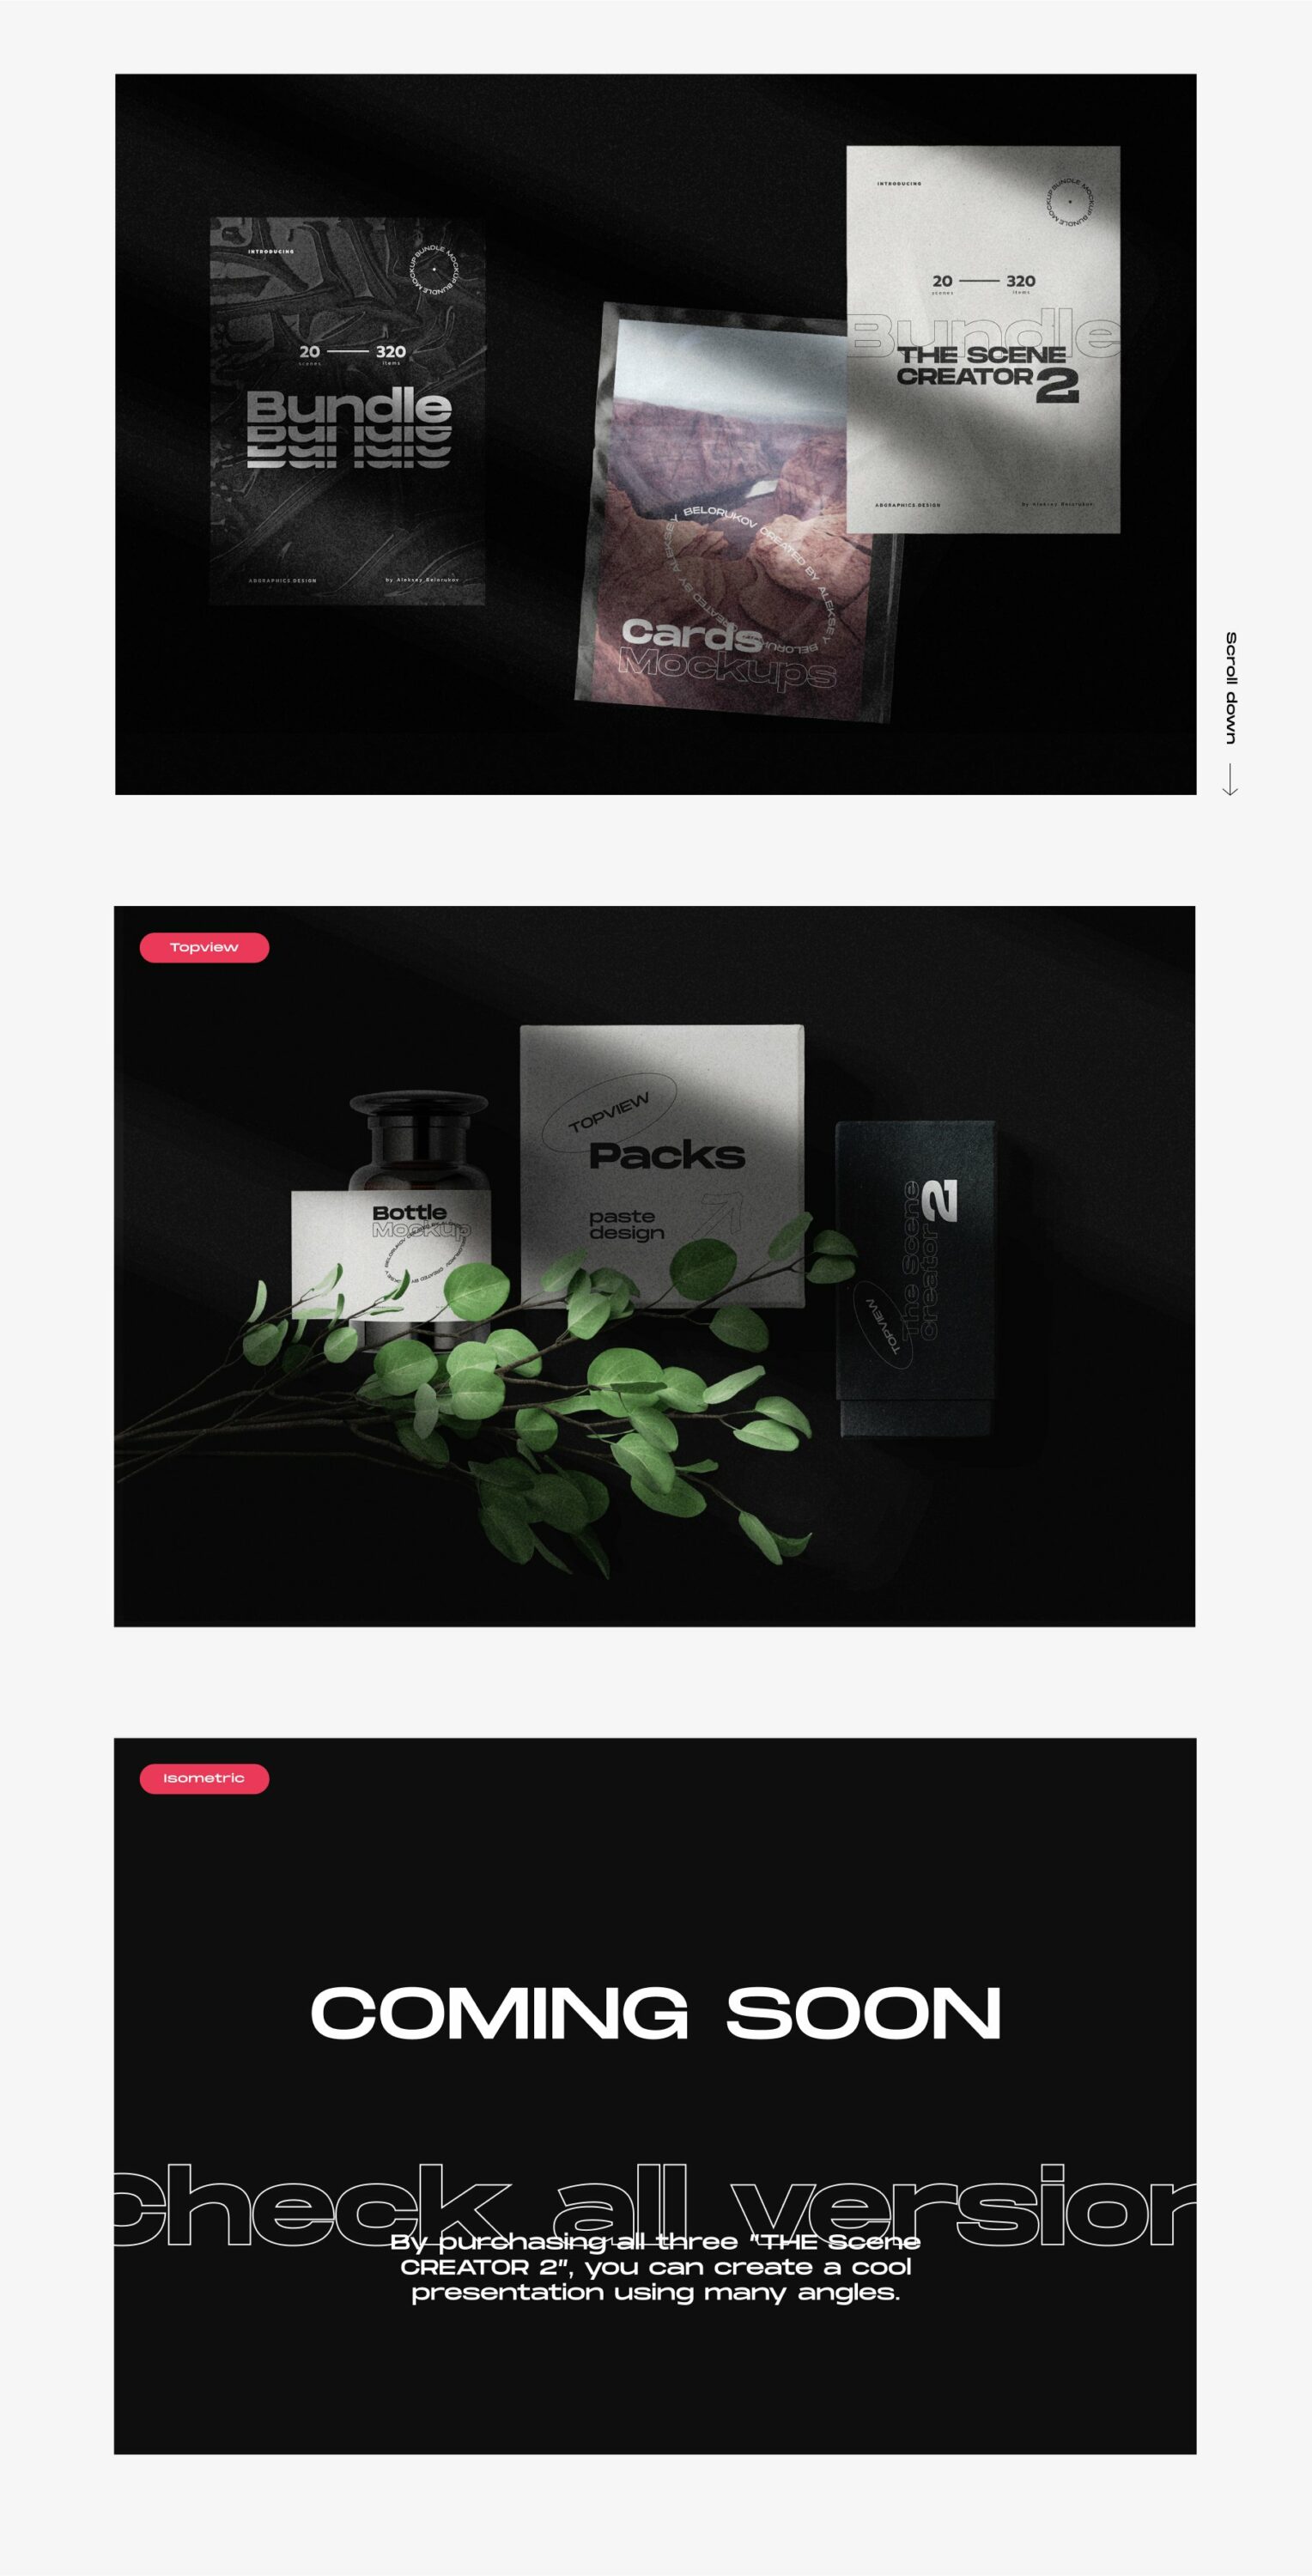 Cool magic design in a dark for your brand.